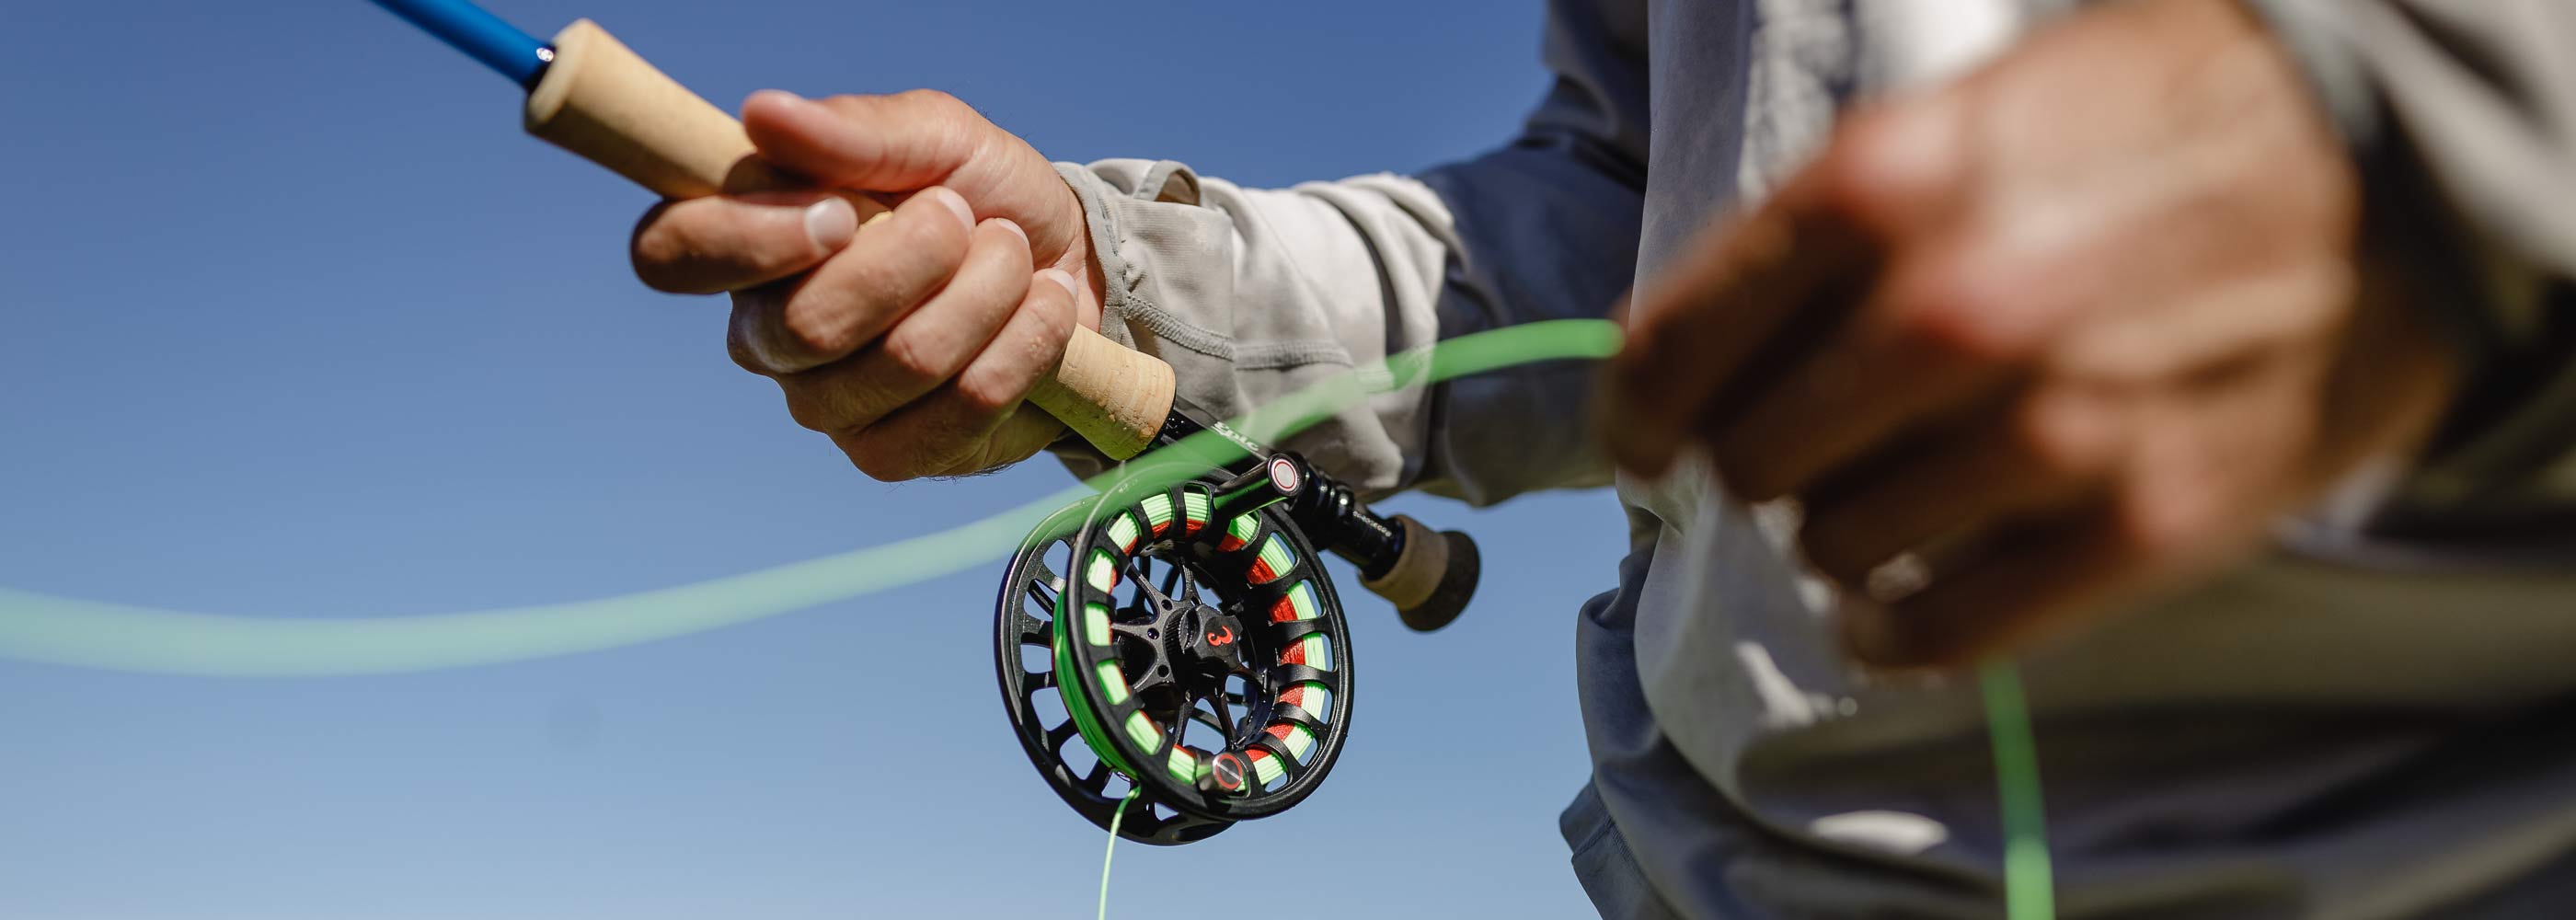 Epic Fly Rods Premium Quality Fly Fishing Rods & Fly Reels